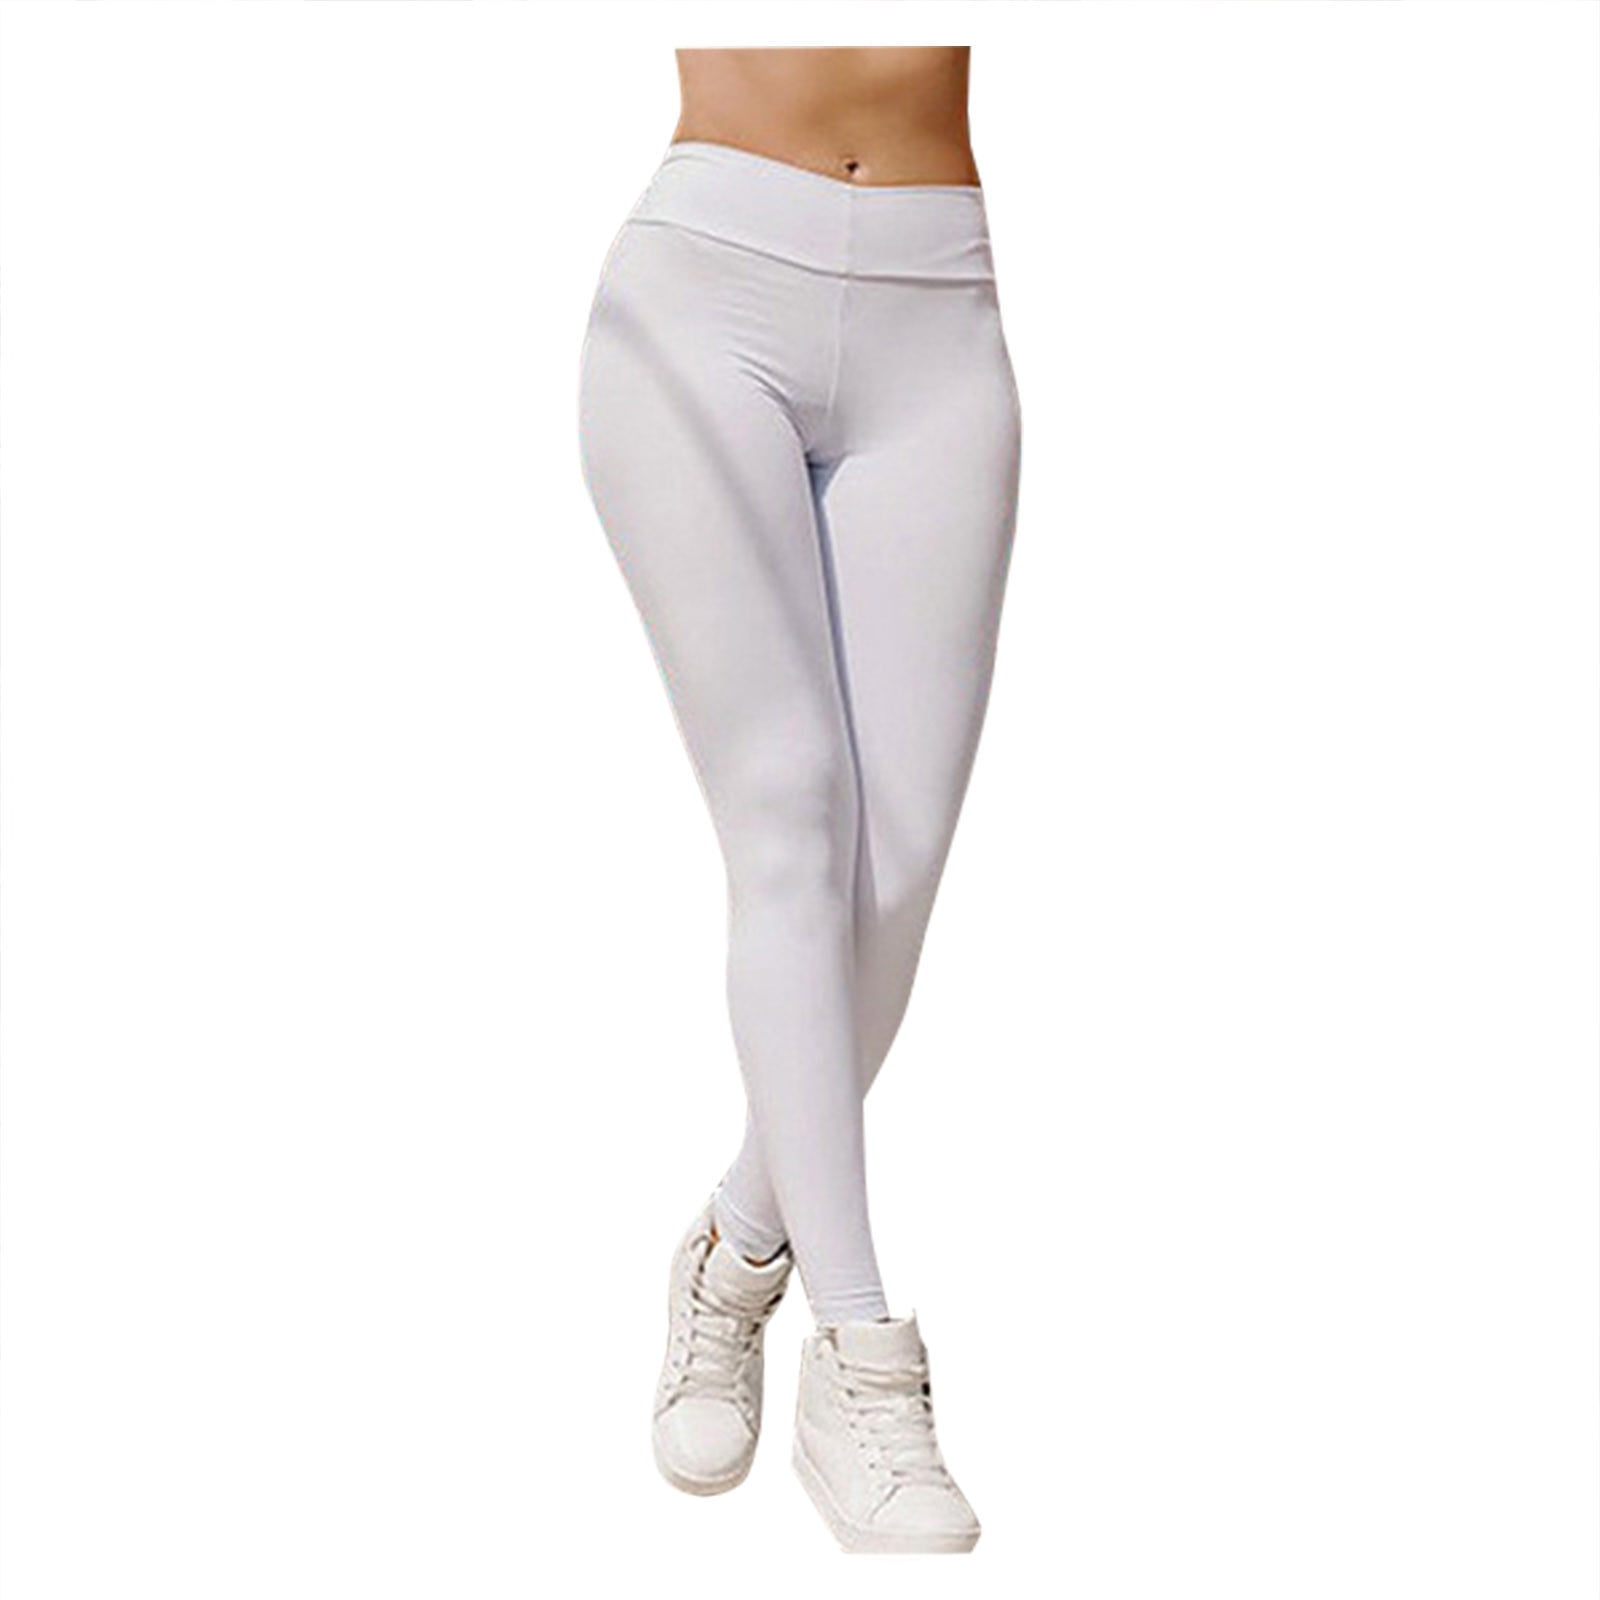 Winter Lamb Wool Warm Leggings Women Thicken Push Up Elasticity Tights for  Fitness Thermal Sexy Skinny Pants Female with Pockets